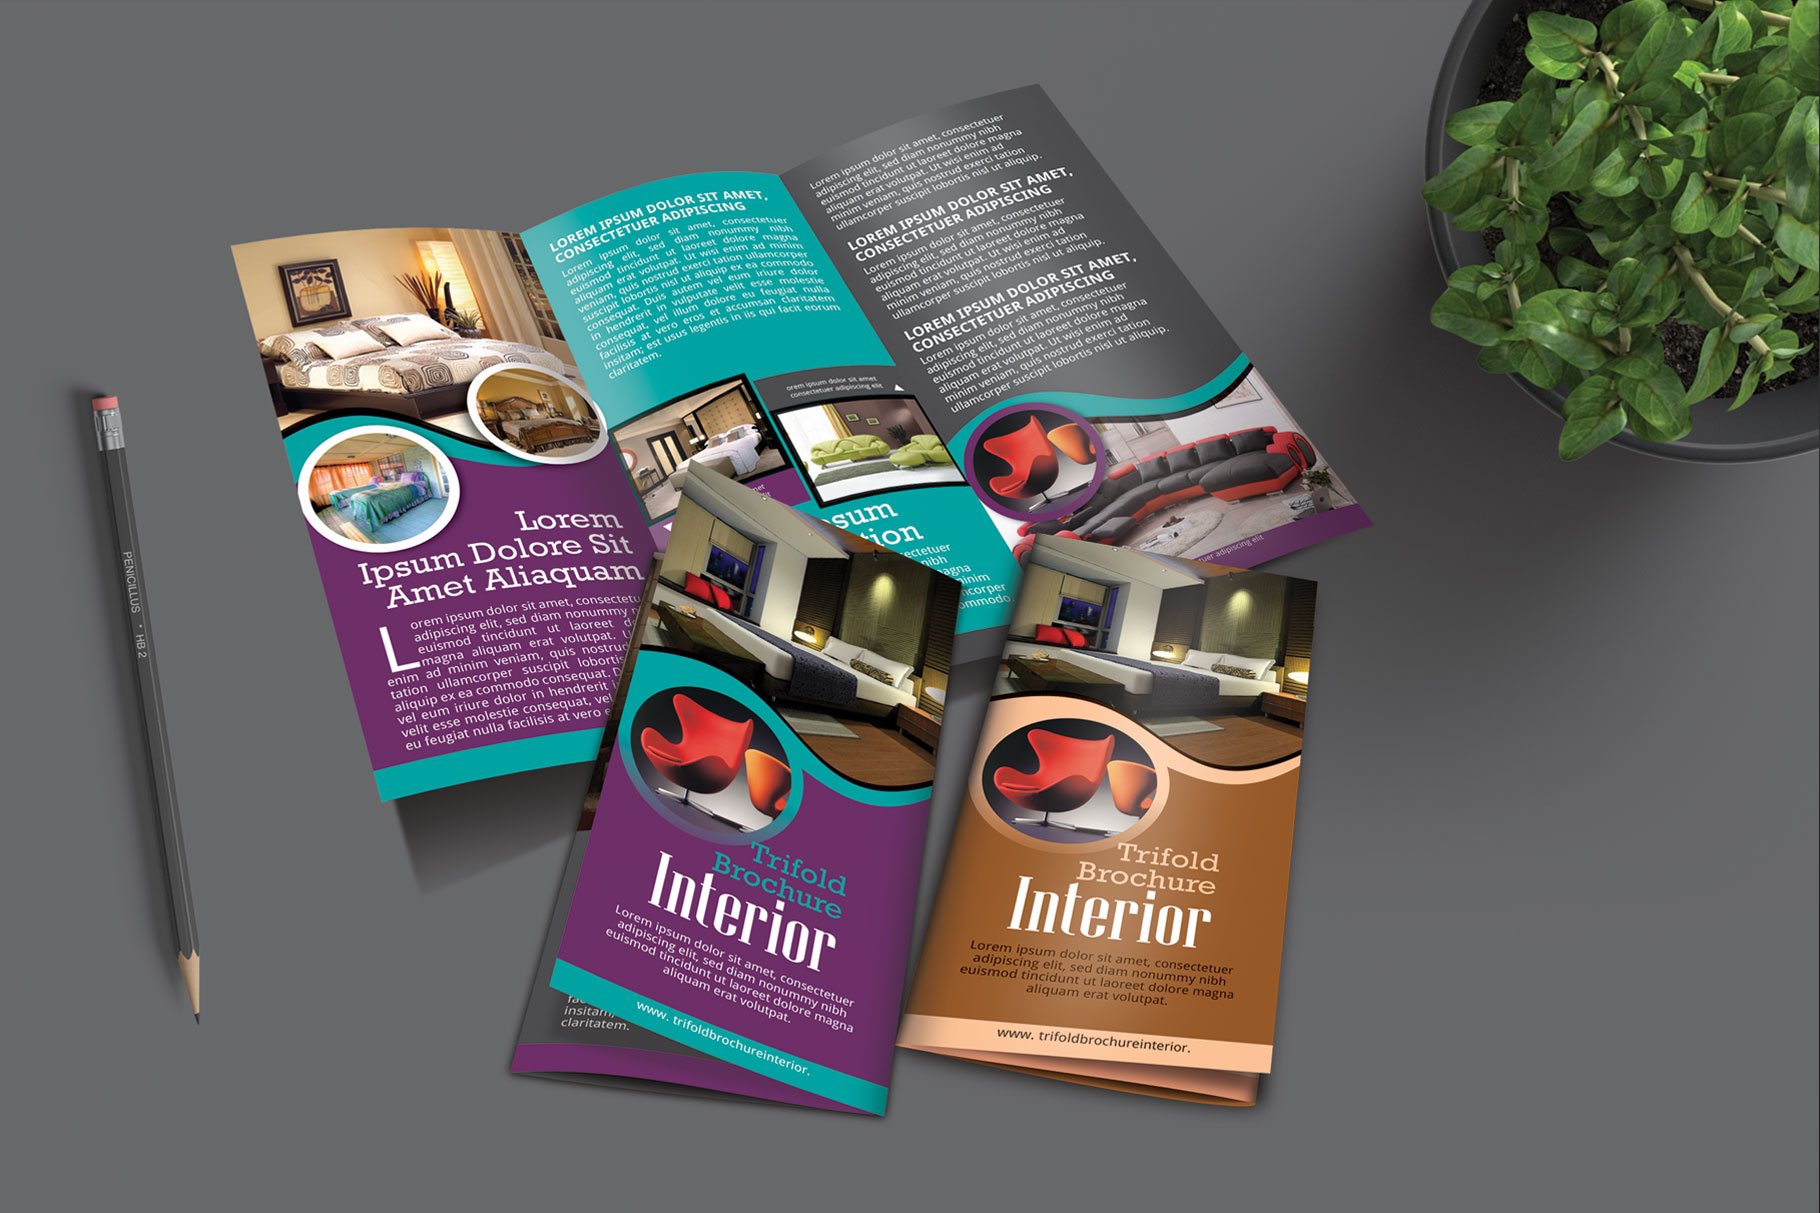 Interior  - Trifold Brochure cover image.